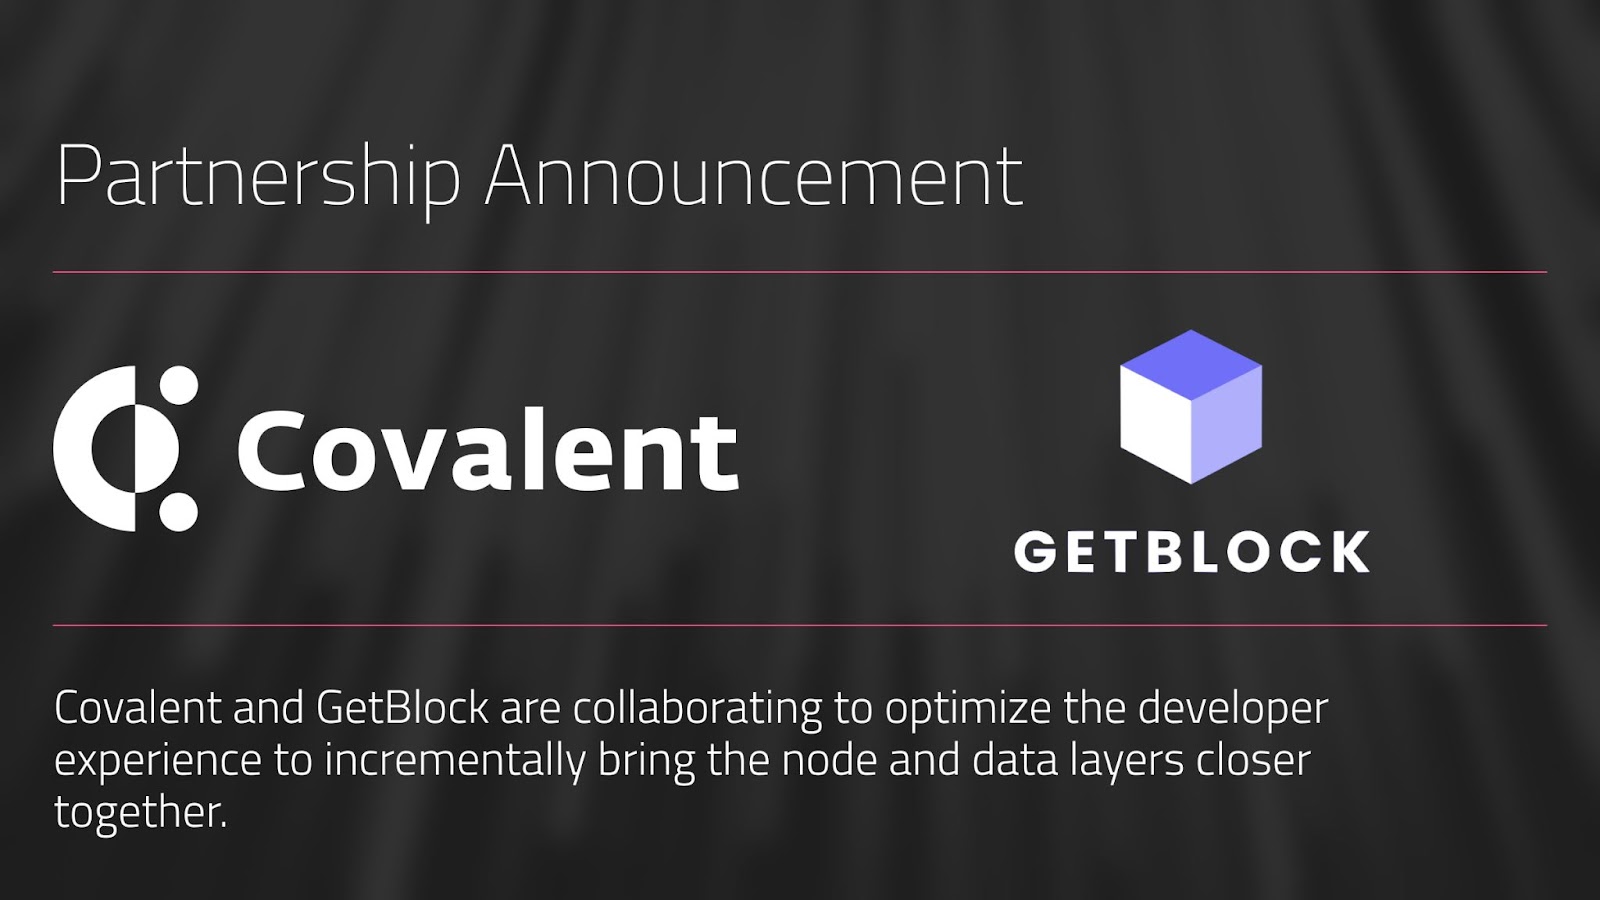 GetBlock and Covalent. What it means for a better developer experience.